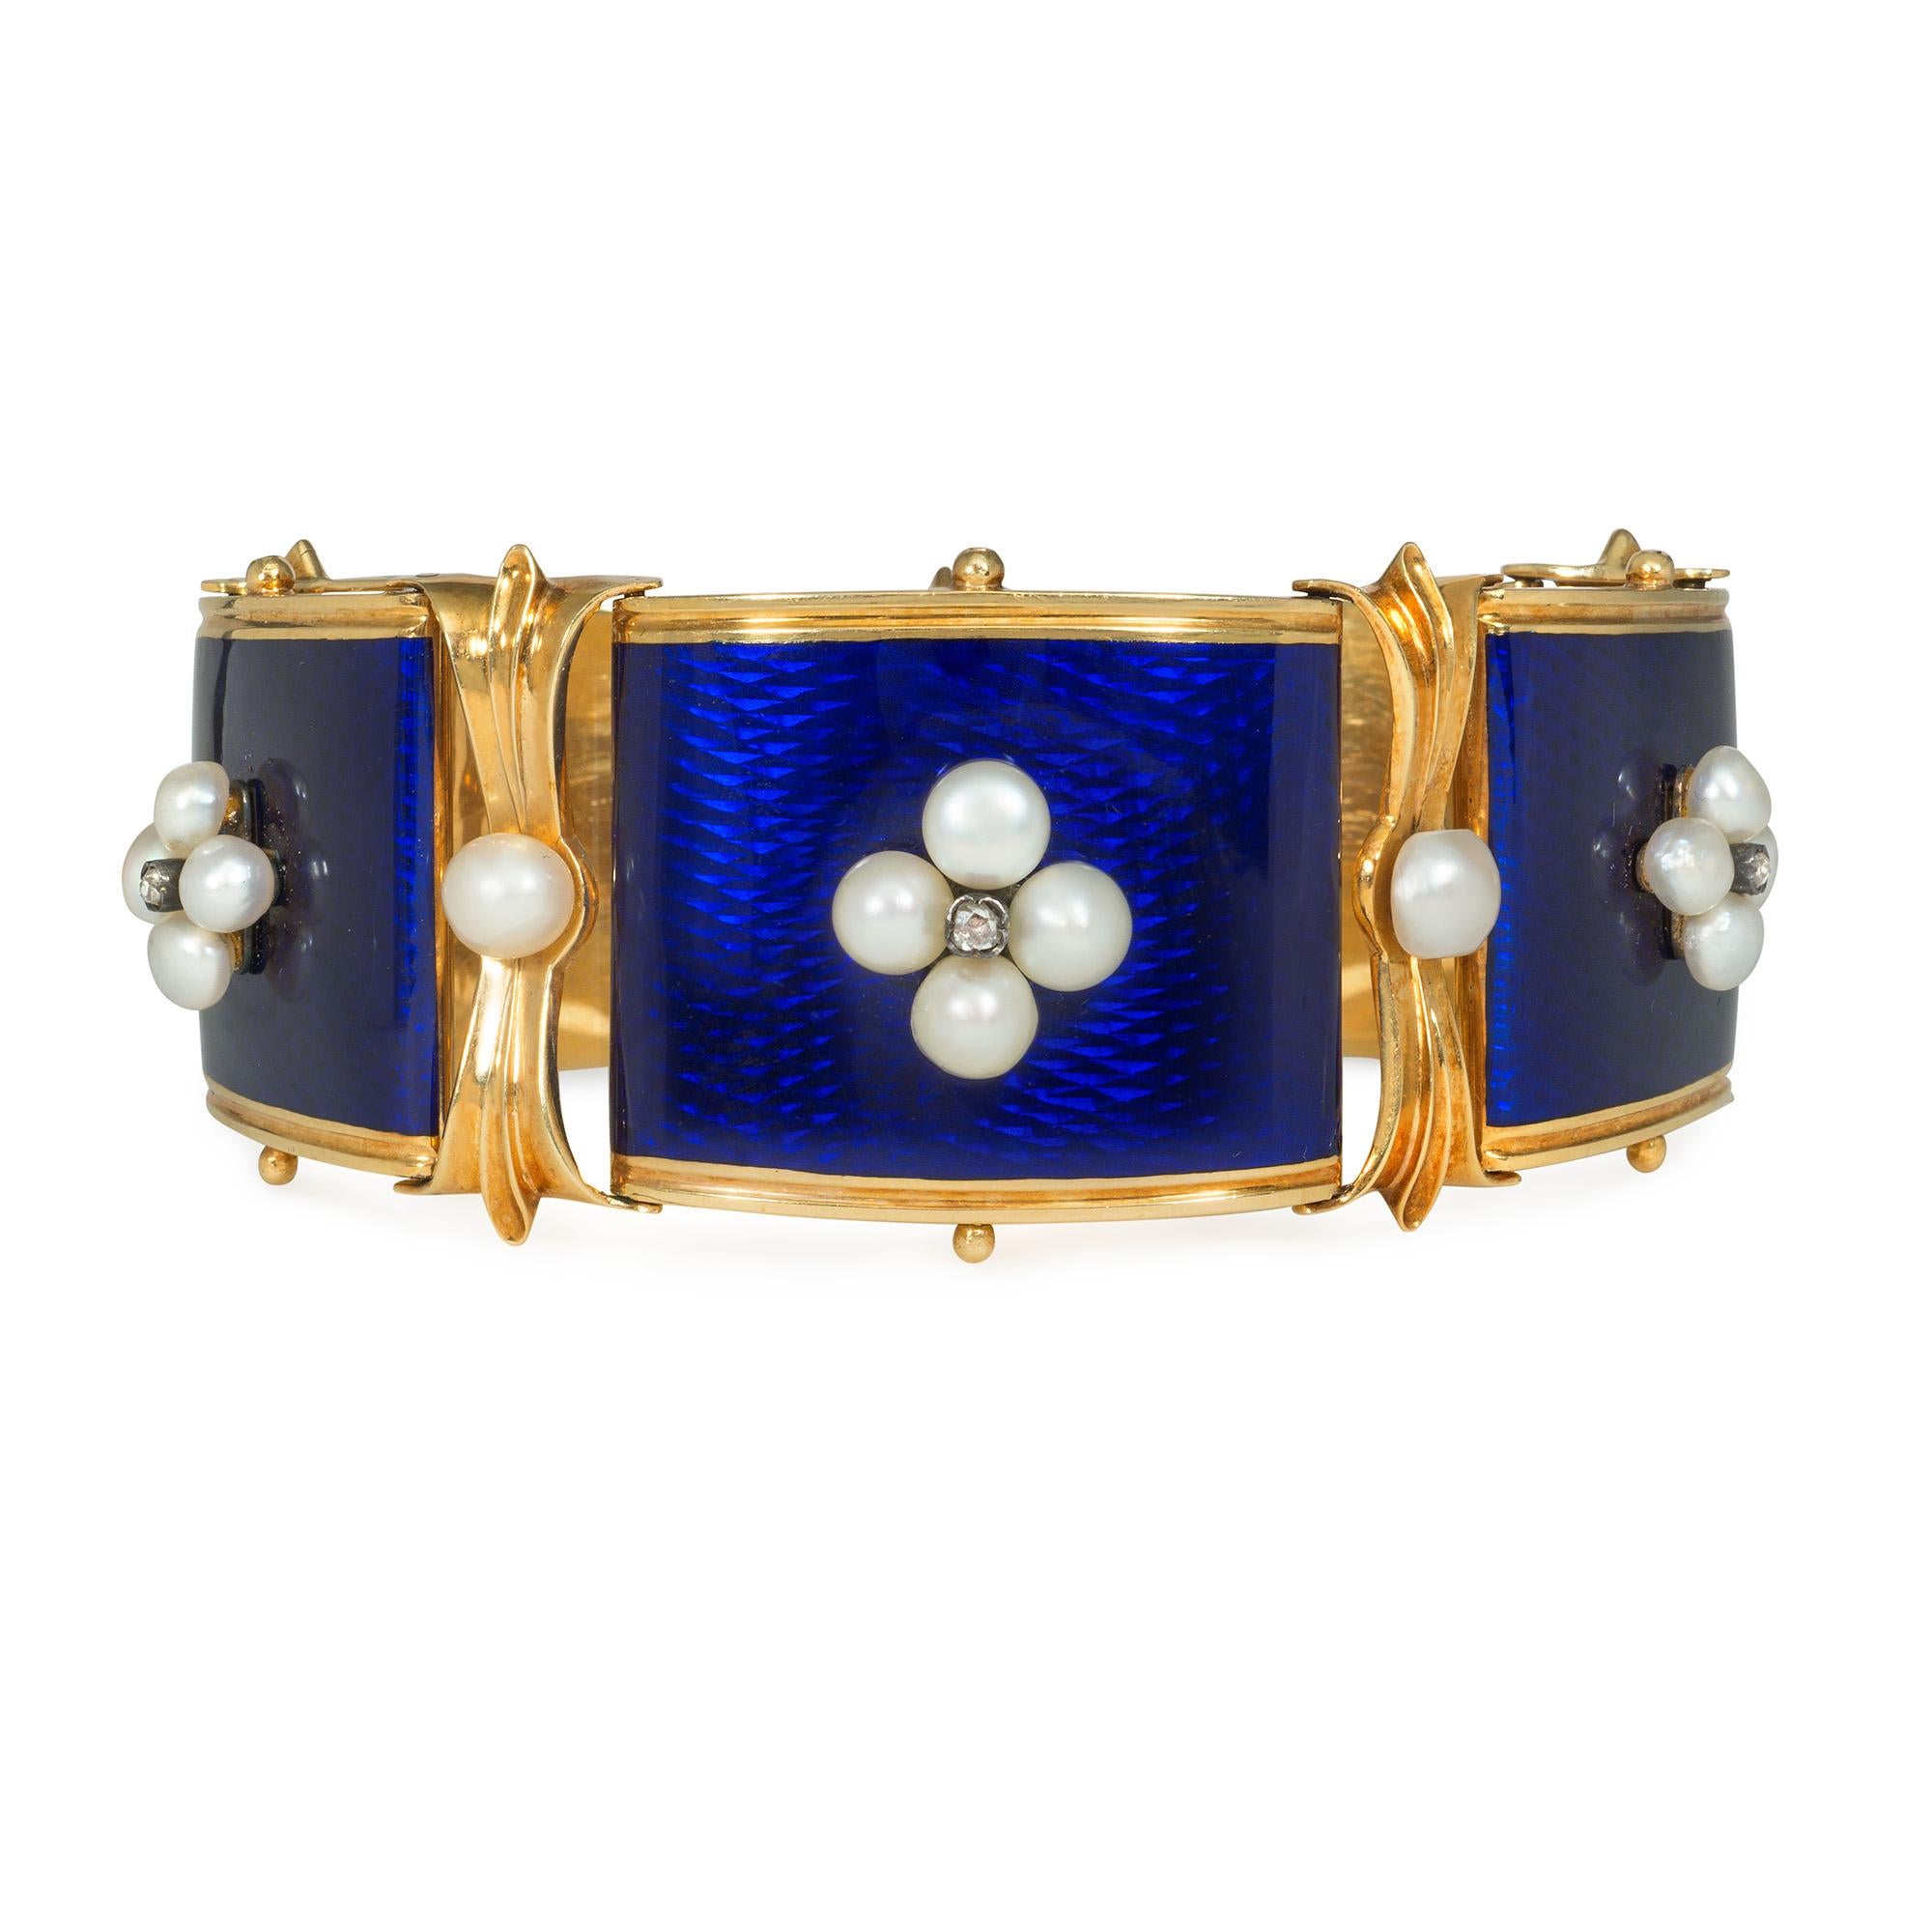 An antique Victorian gold, enamel, pearl, and diamond bracelet comprised of five tapering blue enamel plaques set with quatrefoil pearl and rose diamond elements, with foliate motif and pearl spacers, in 18k with double locking box clasp. French